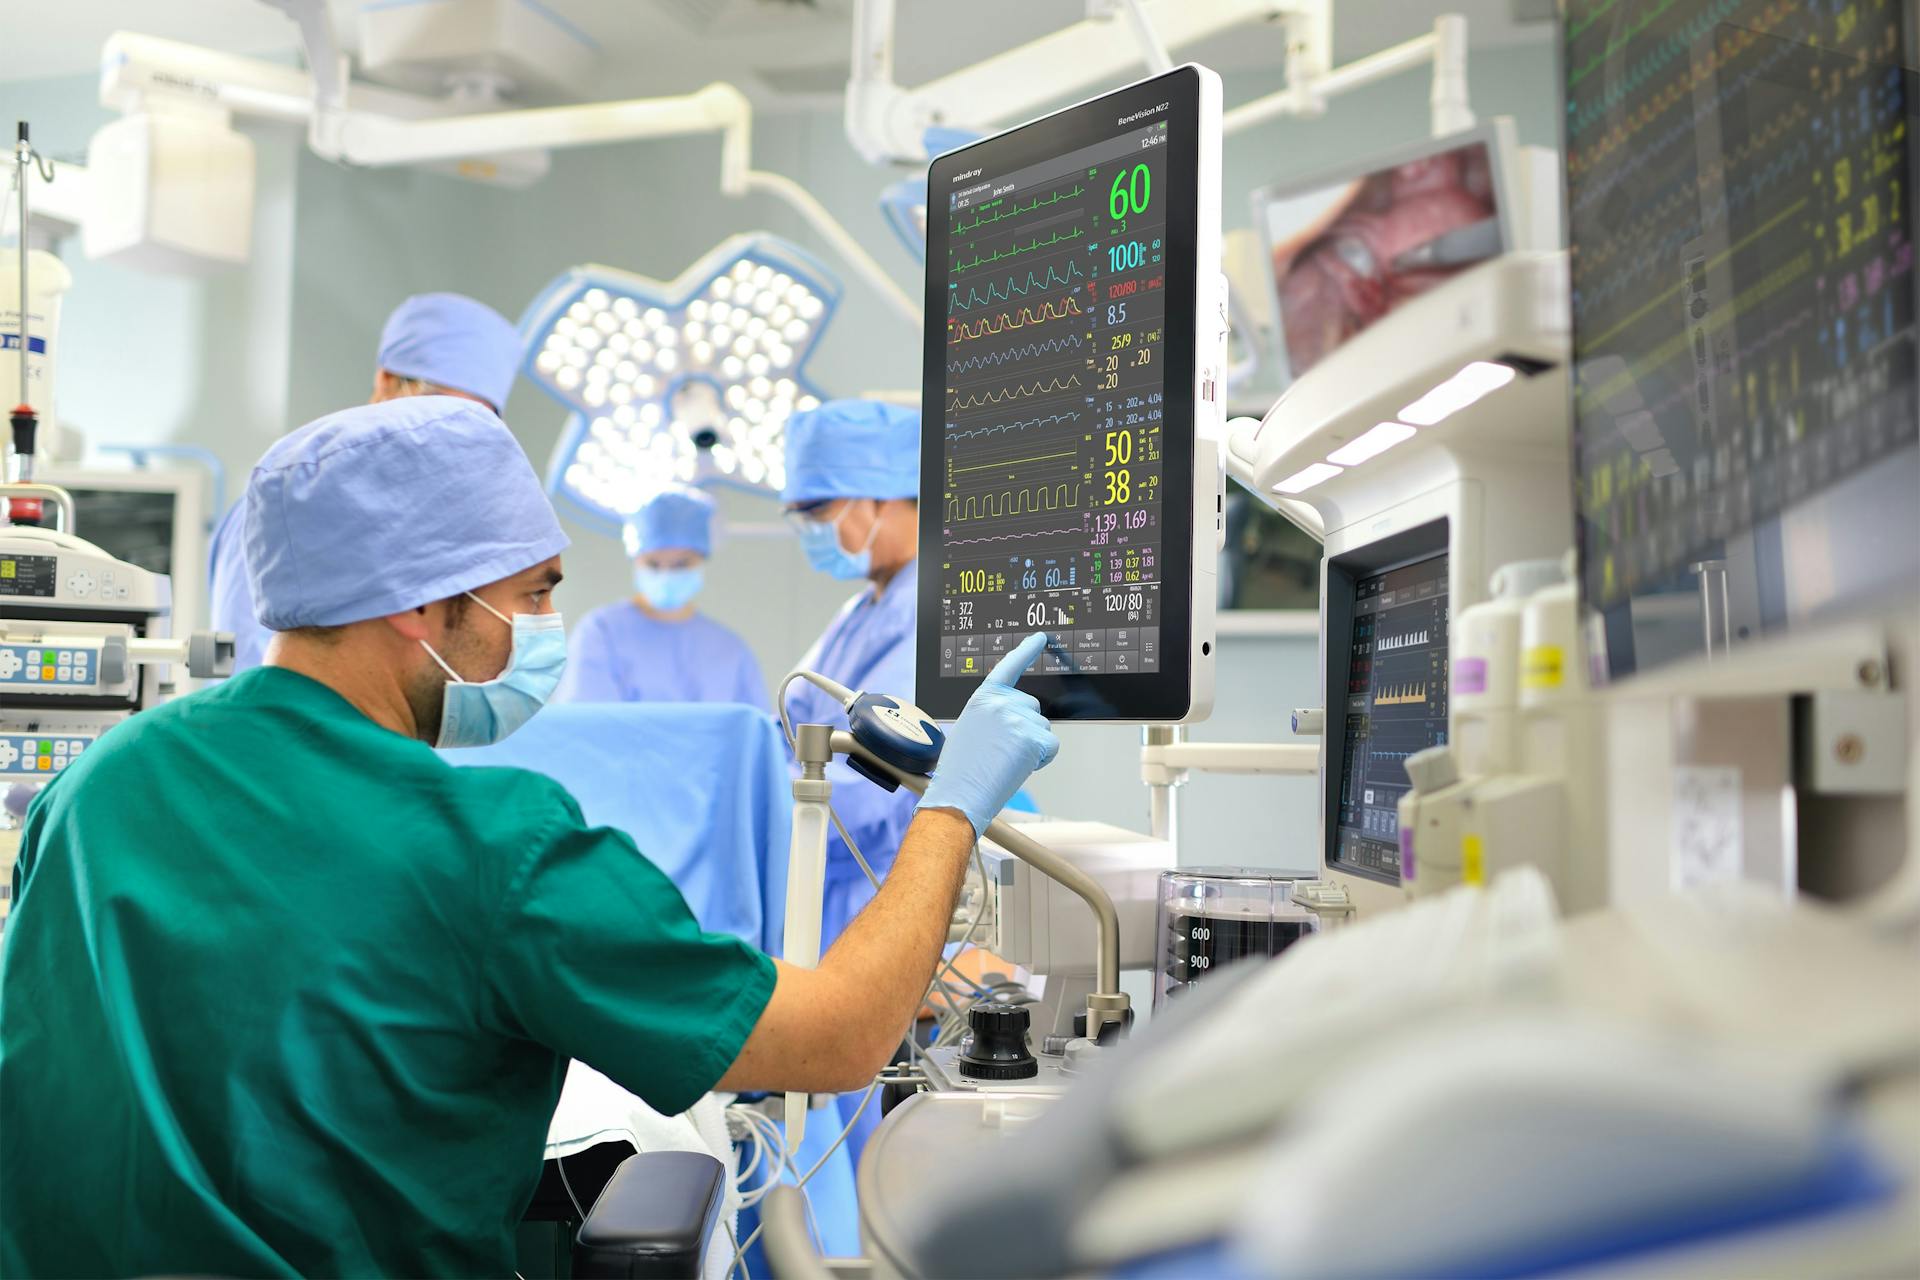 Medical staff in surgery looking at a patient's vital signs